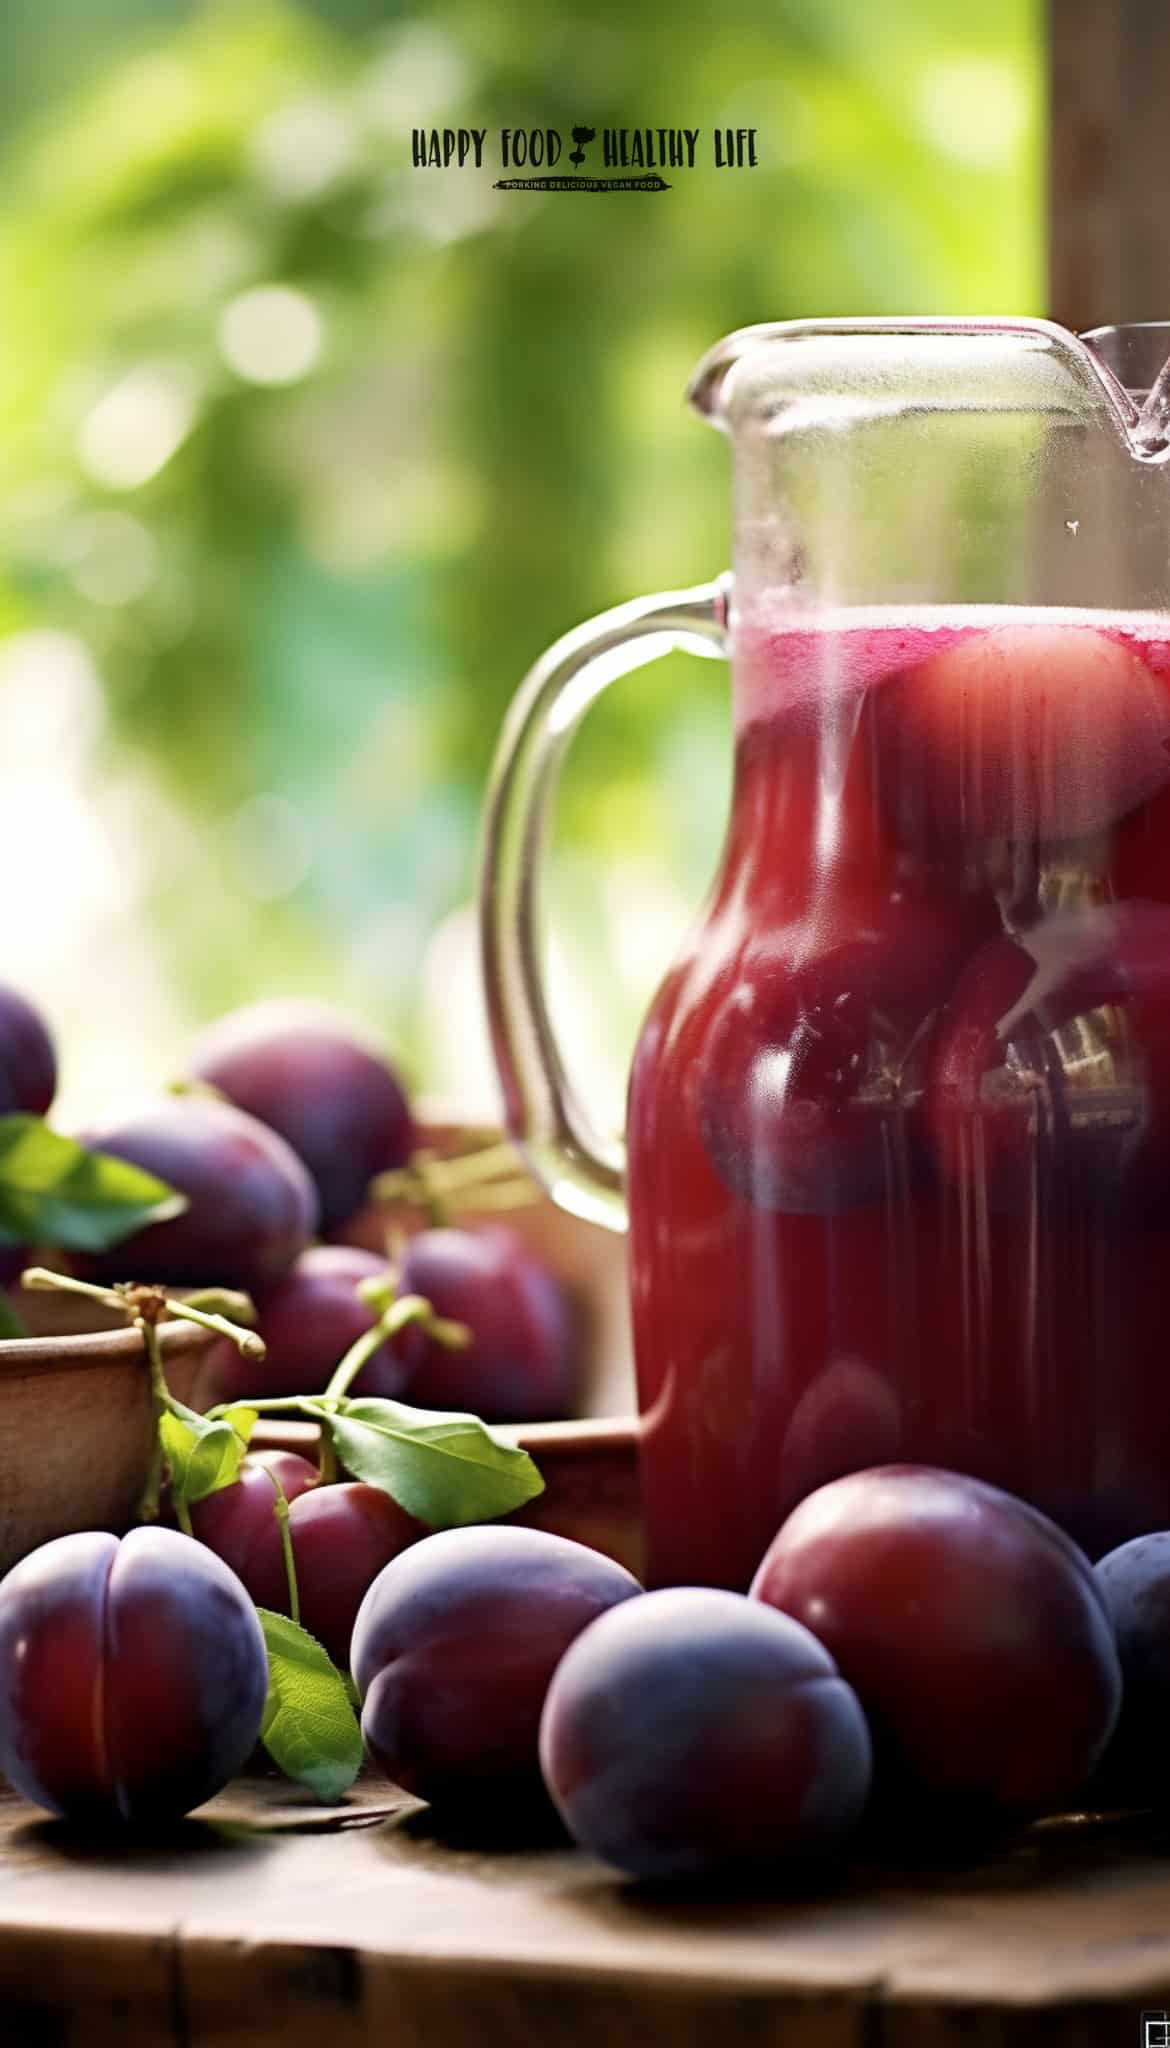 pitcher of purple liquid to the right and shiny purple plums all around it, all sitting on a wooden butcher block